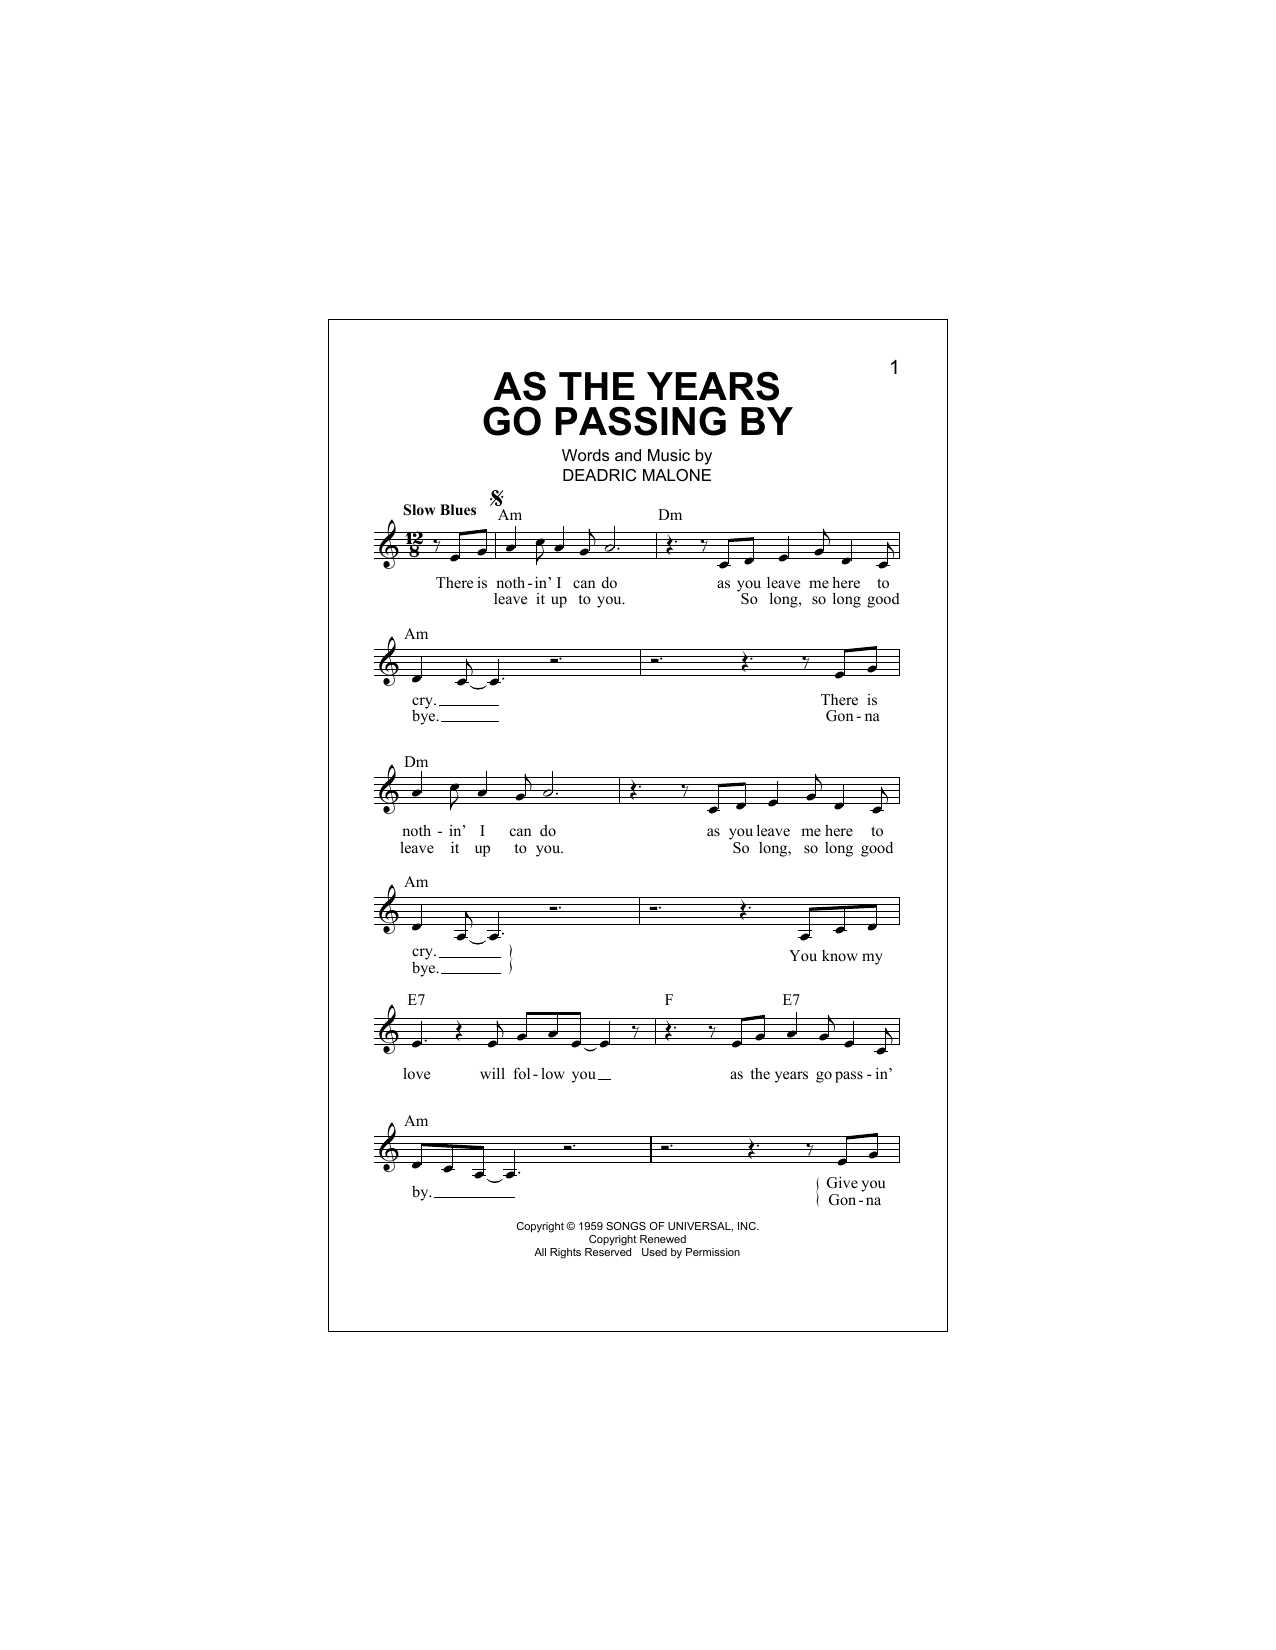 Download Deadric Malone As The Years Go Passing By Sheet Music